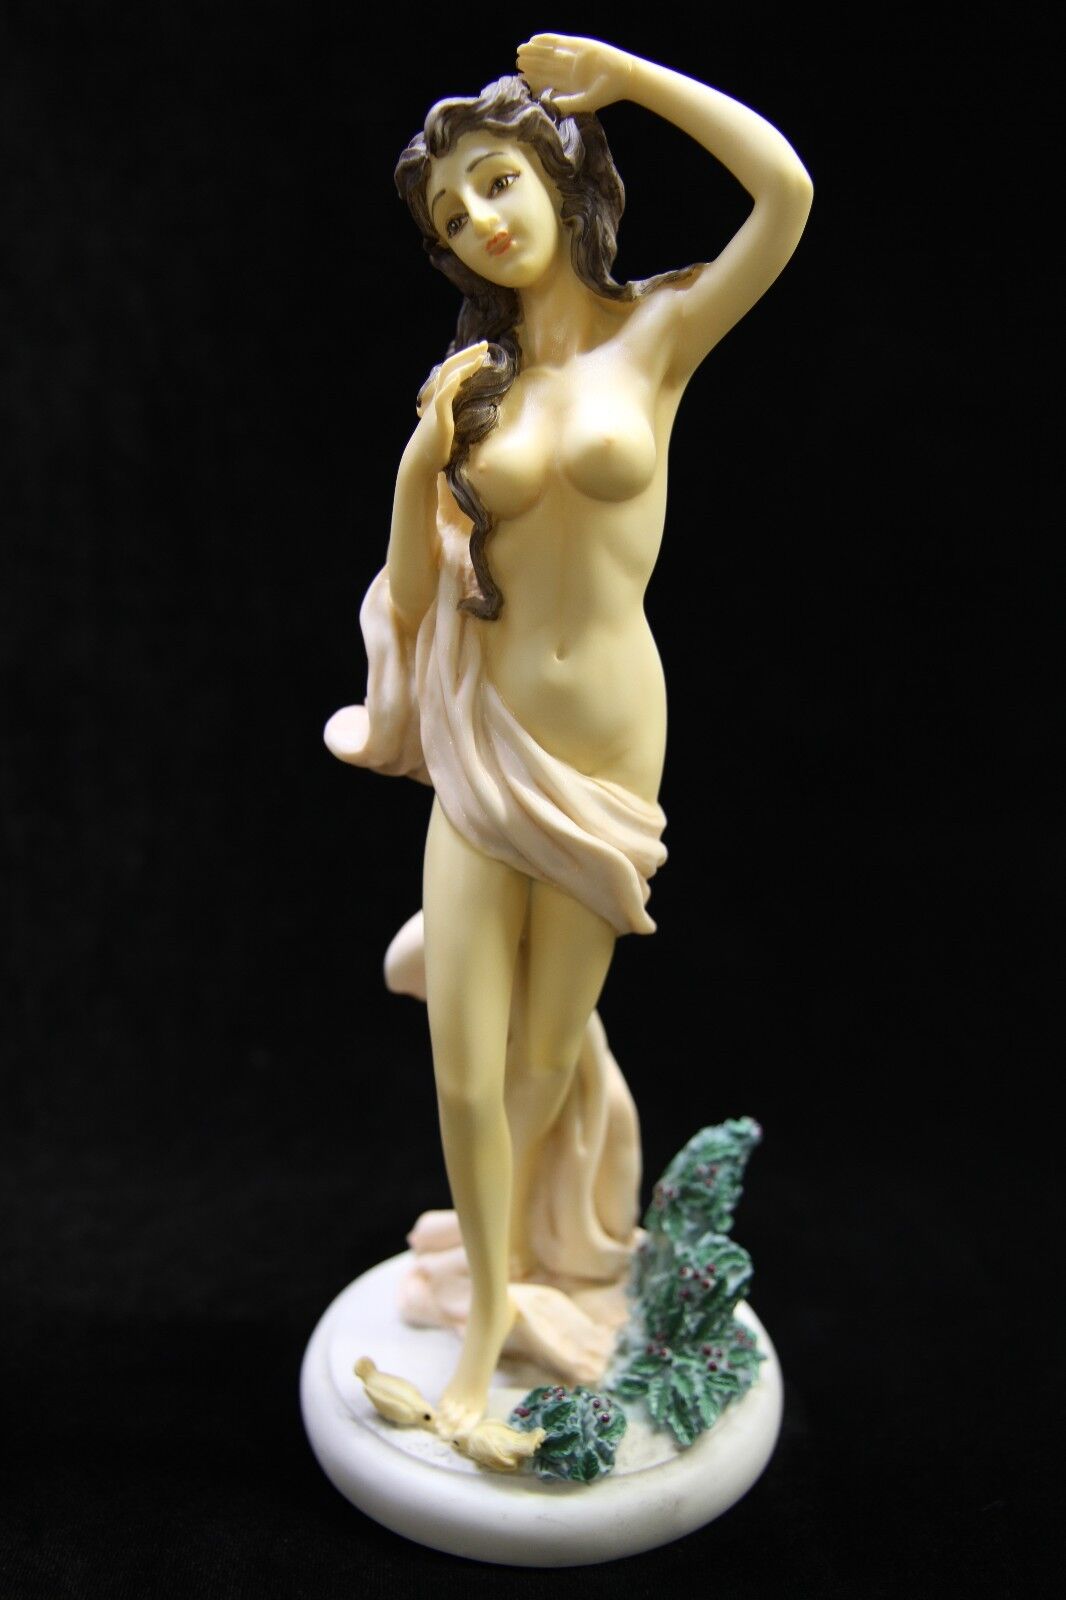 Sexy Nude Naked Woman Girl with Birds Statue Sculpture Figurine Made in Italy